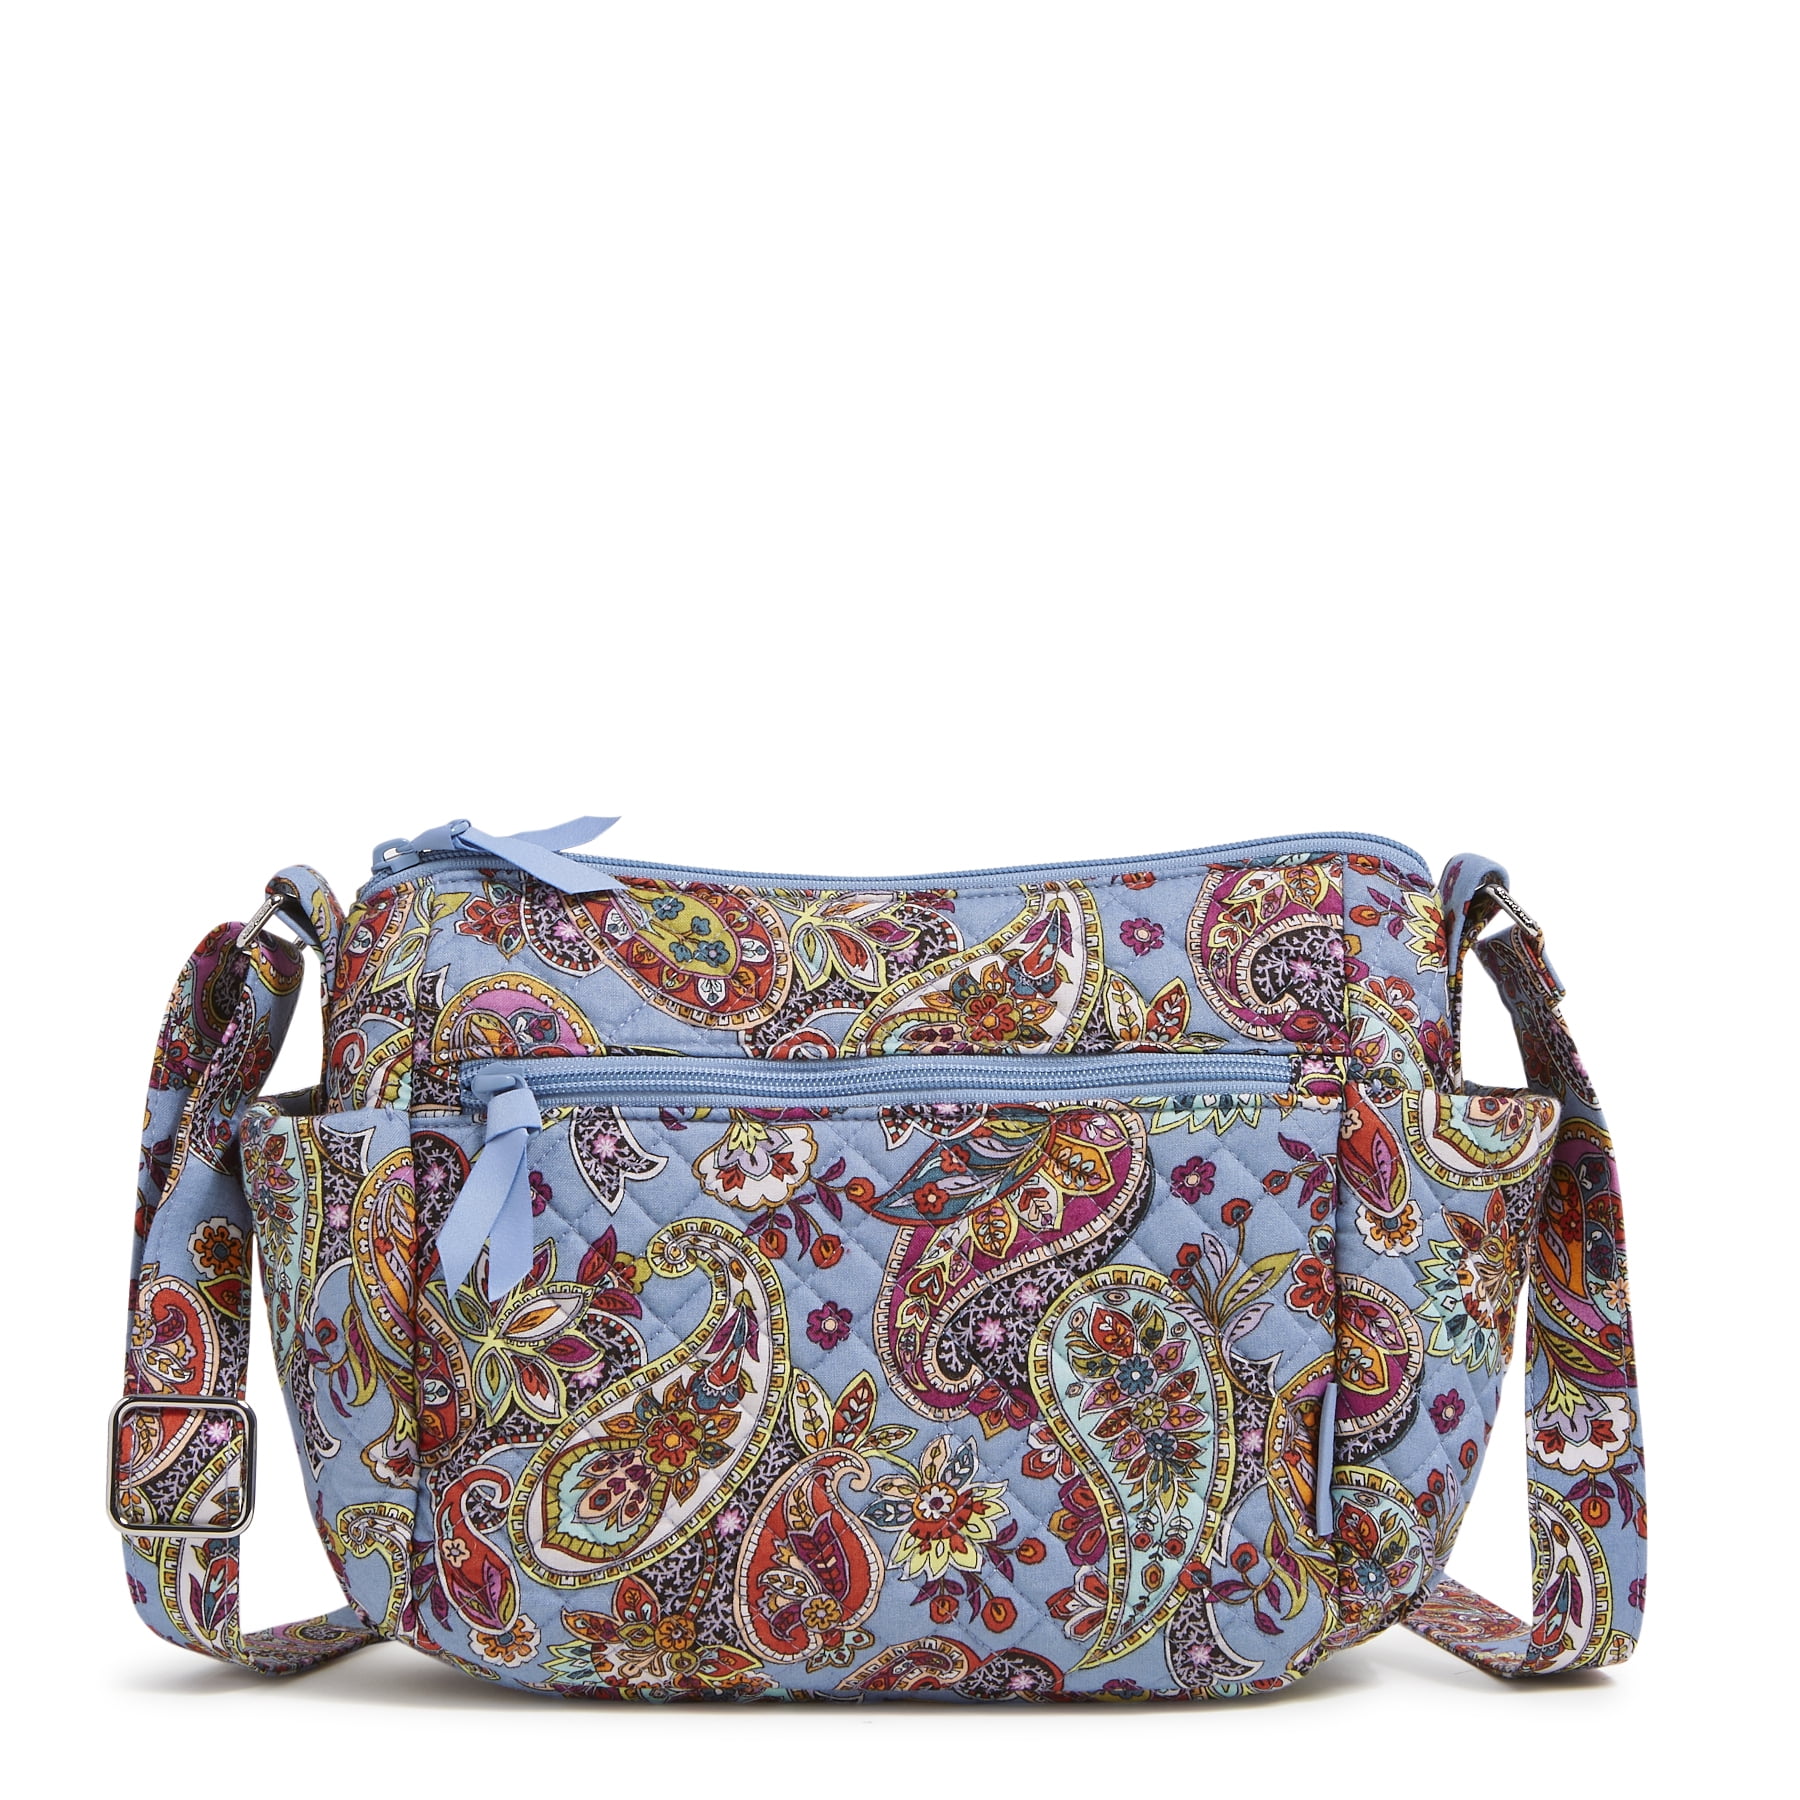 VERA BRADLEY Bella Pattern Limited Edition Silk Collection Paisley Quilted  Purse | eBay